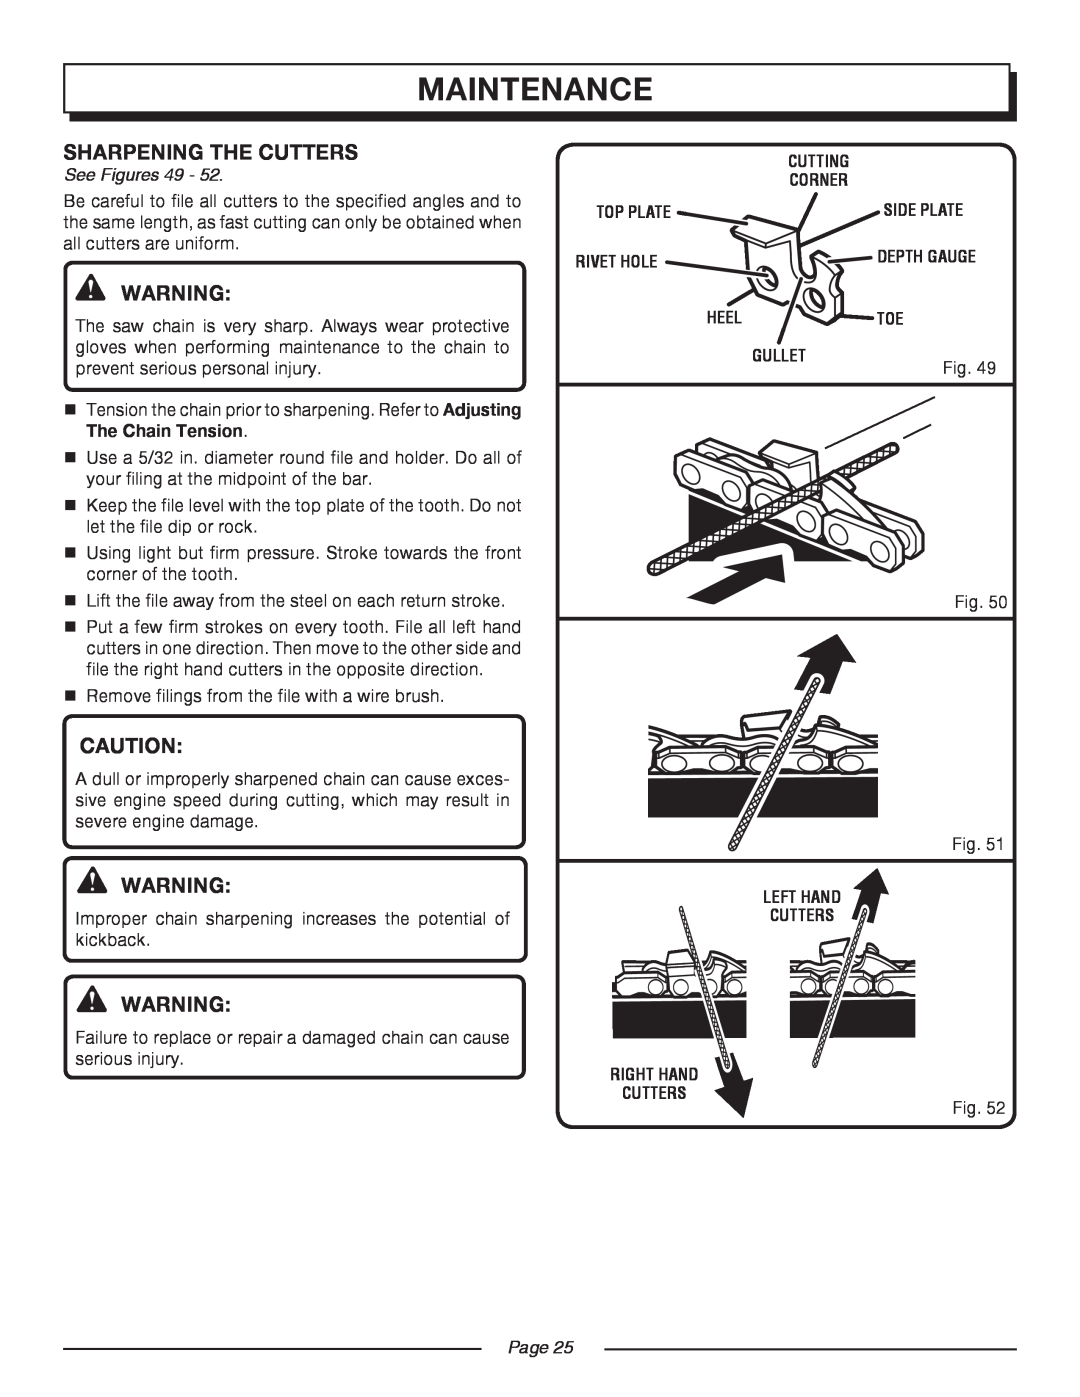 Homelite UT10552 manual maintenance, Sharpening The Cutters, See Figures 49, Page 